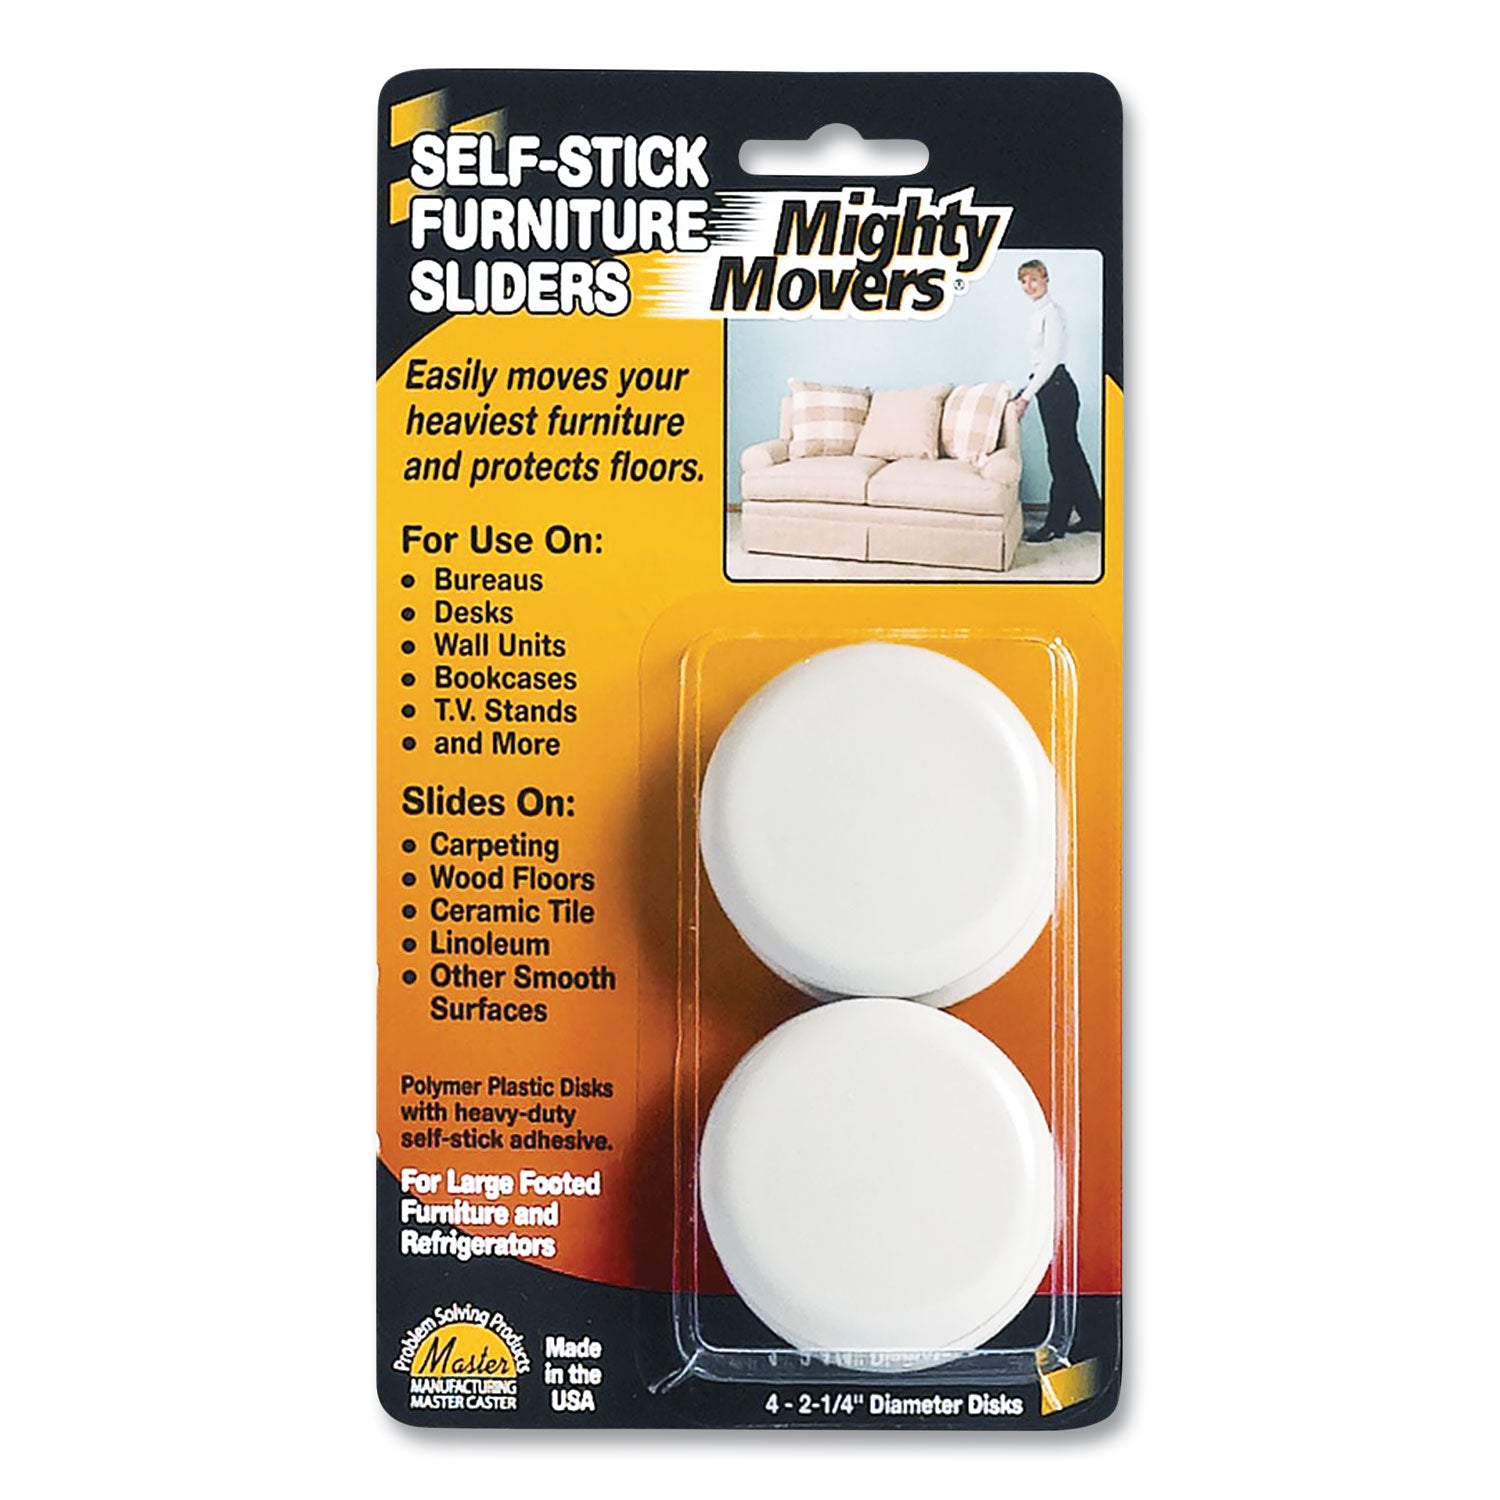 mighty-movers-self-stick-furniture-sliders-round-225-diameter-beige-4-pack_mas87003 - 1